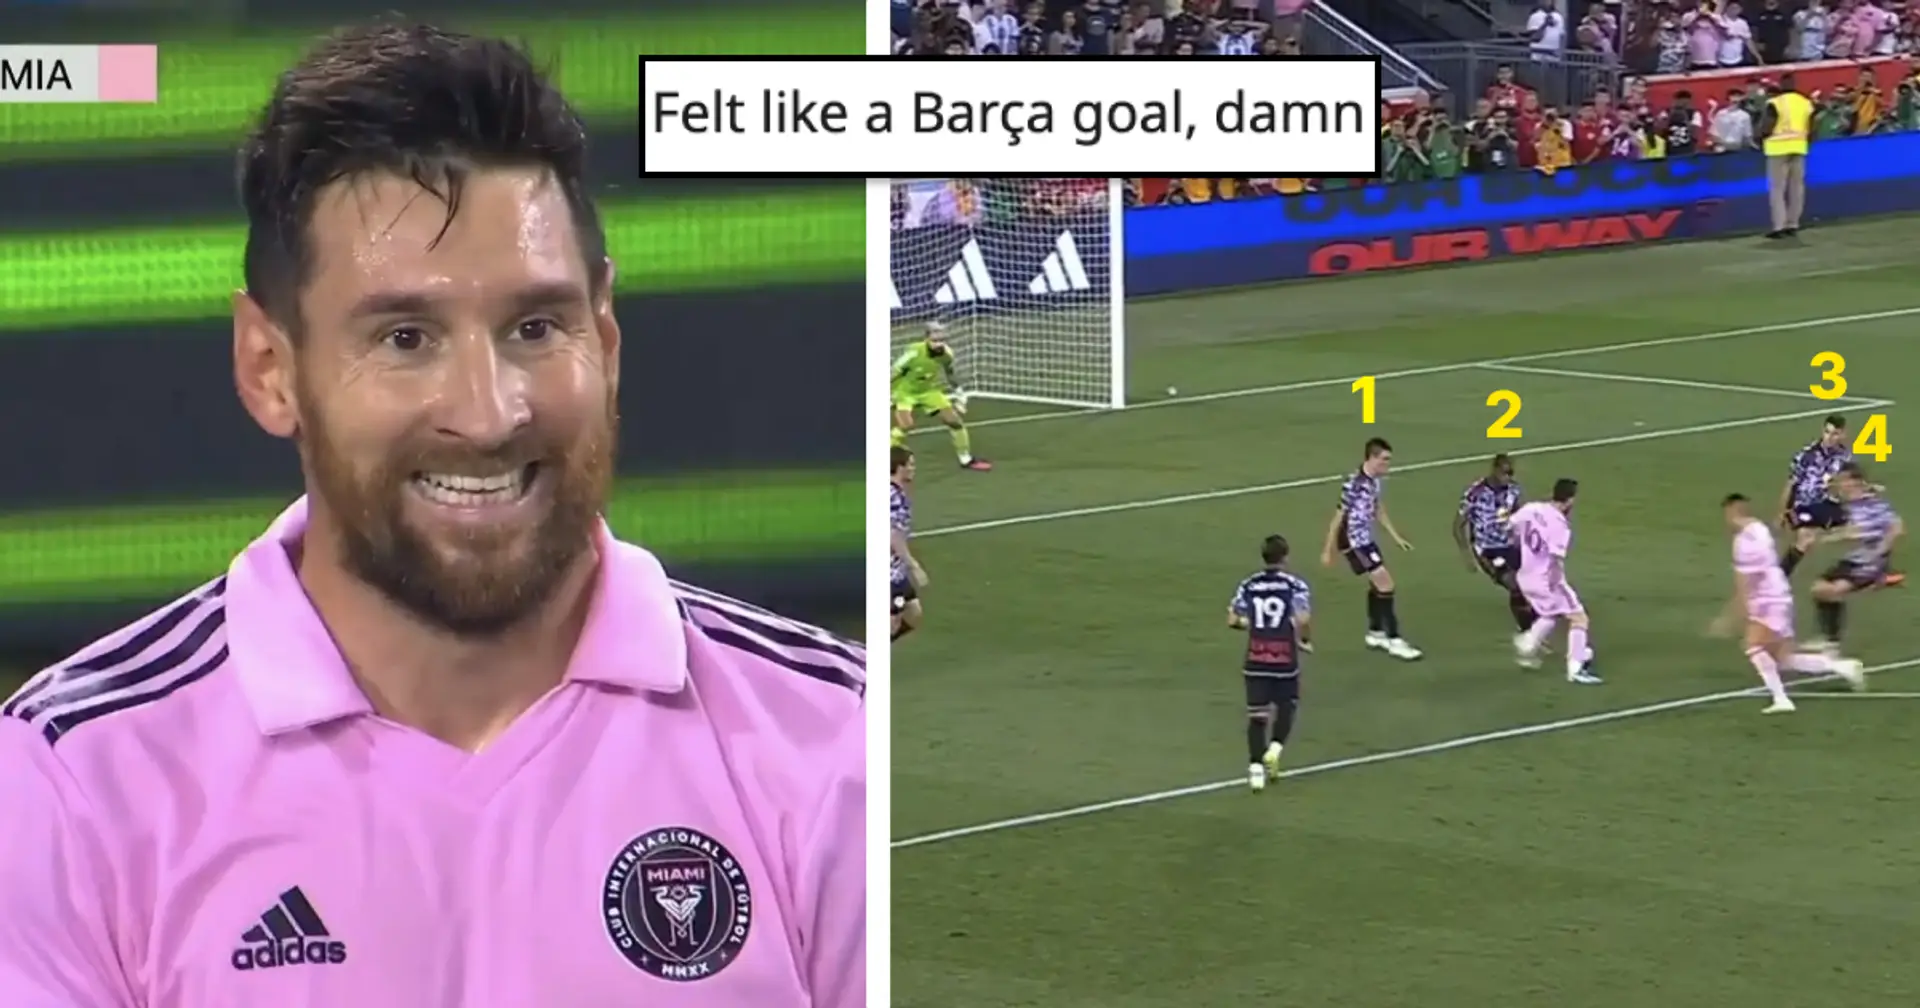 'How the f*** did he see that?!': Fans react to Messi's debut MLS goal – all 3 Barca legends involved